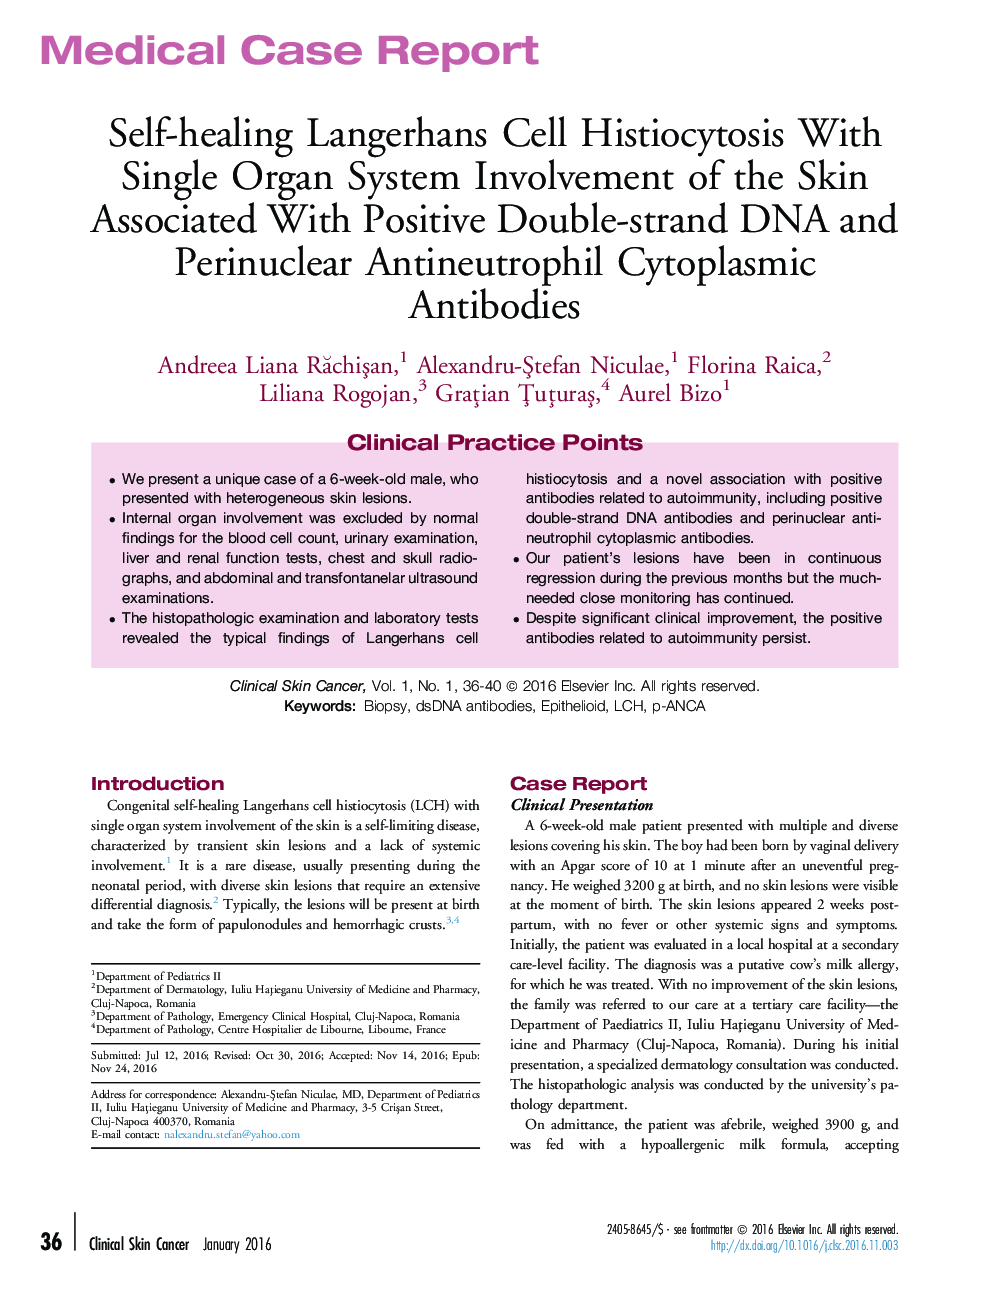 Self-healing Langerhans Cell Histiocytosis With Single Organ System Involvement of the Skin Associated With Positive Double-strand DNA and Perinuclear Antineutrophil Cytoplasmic Antibodies